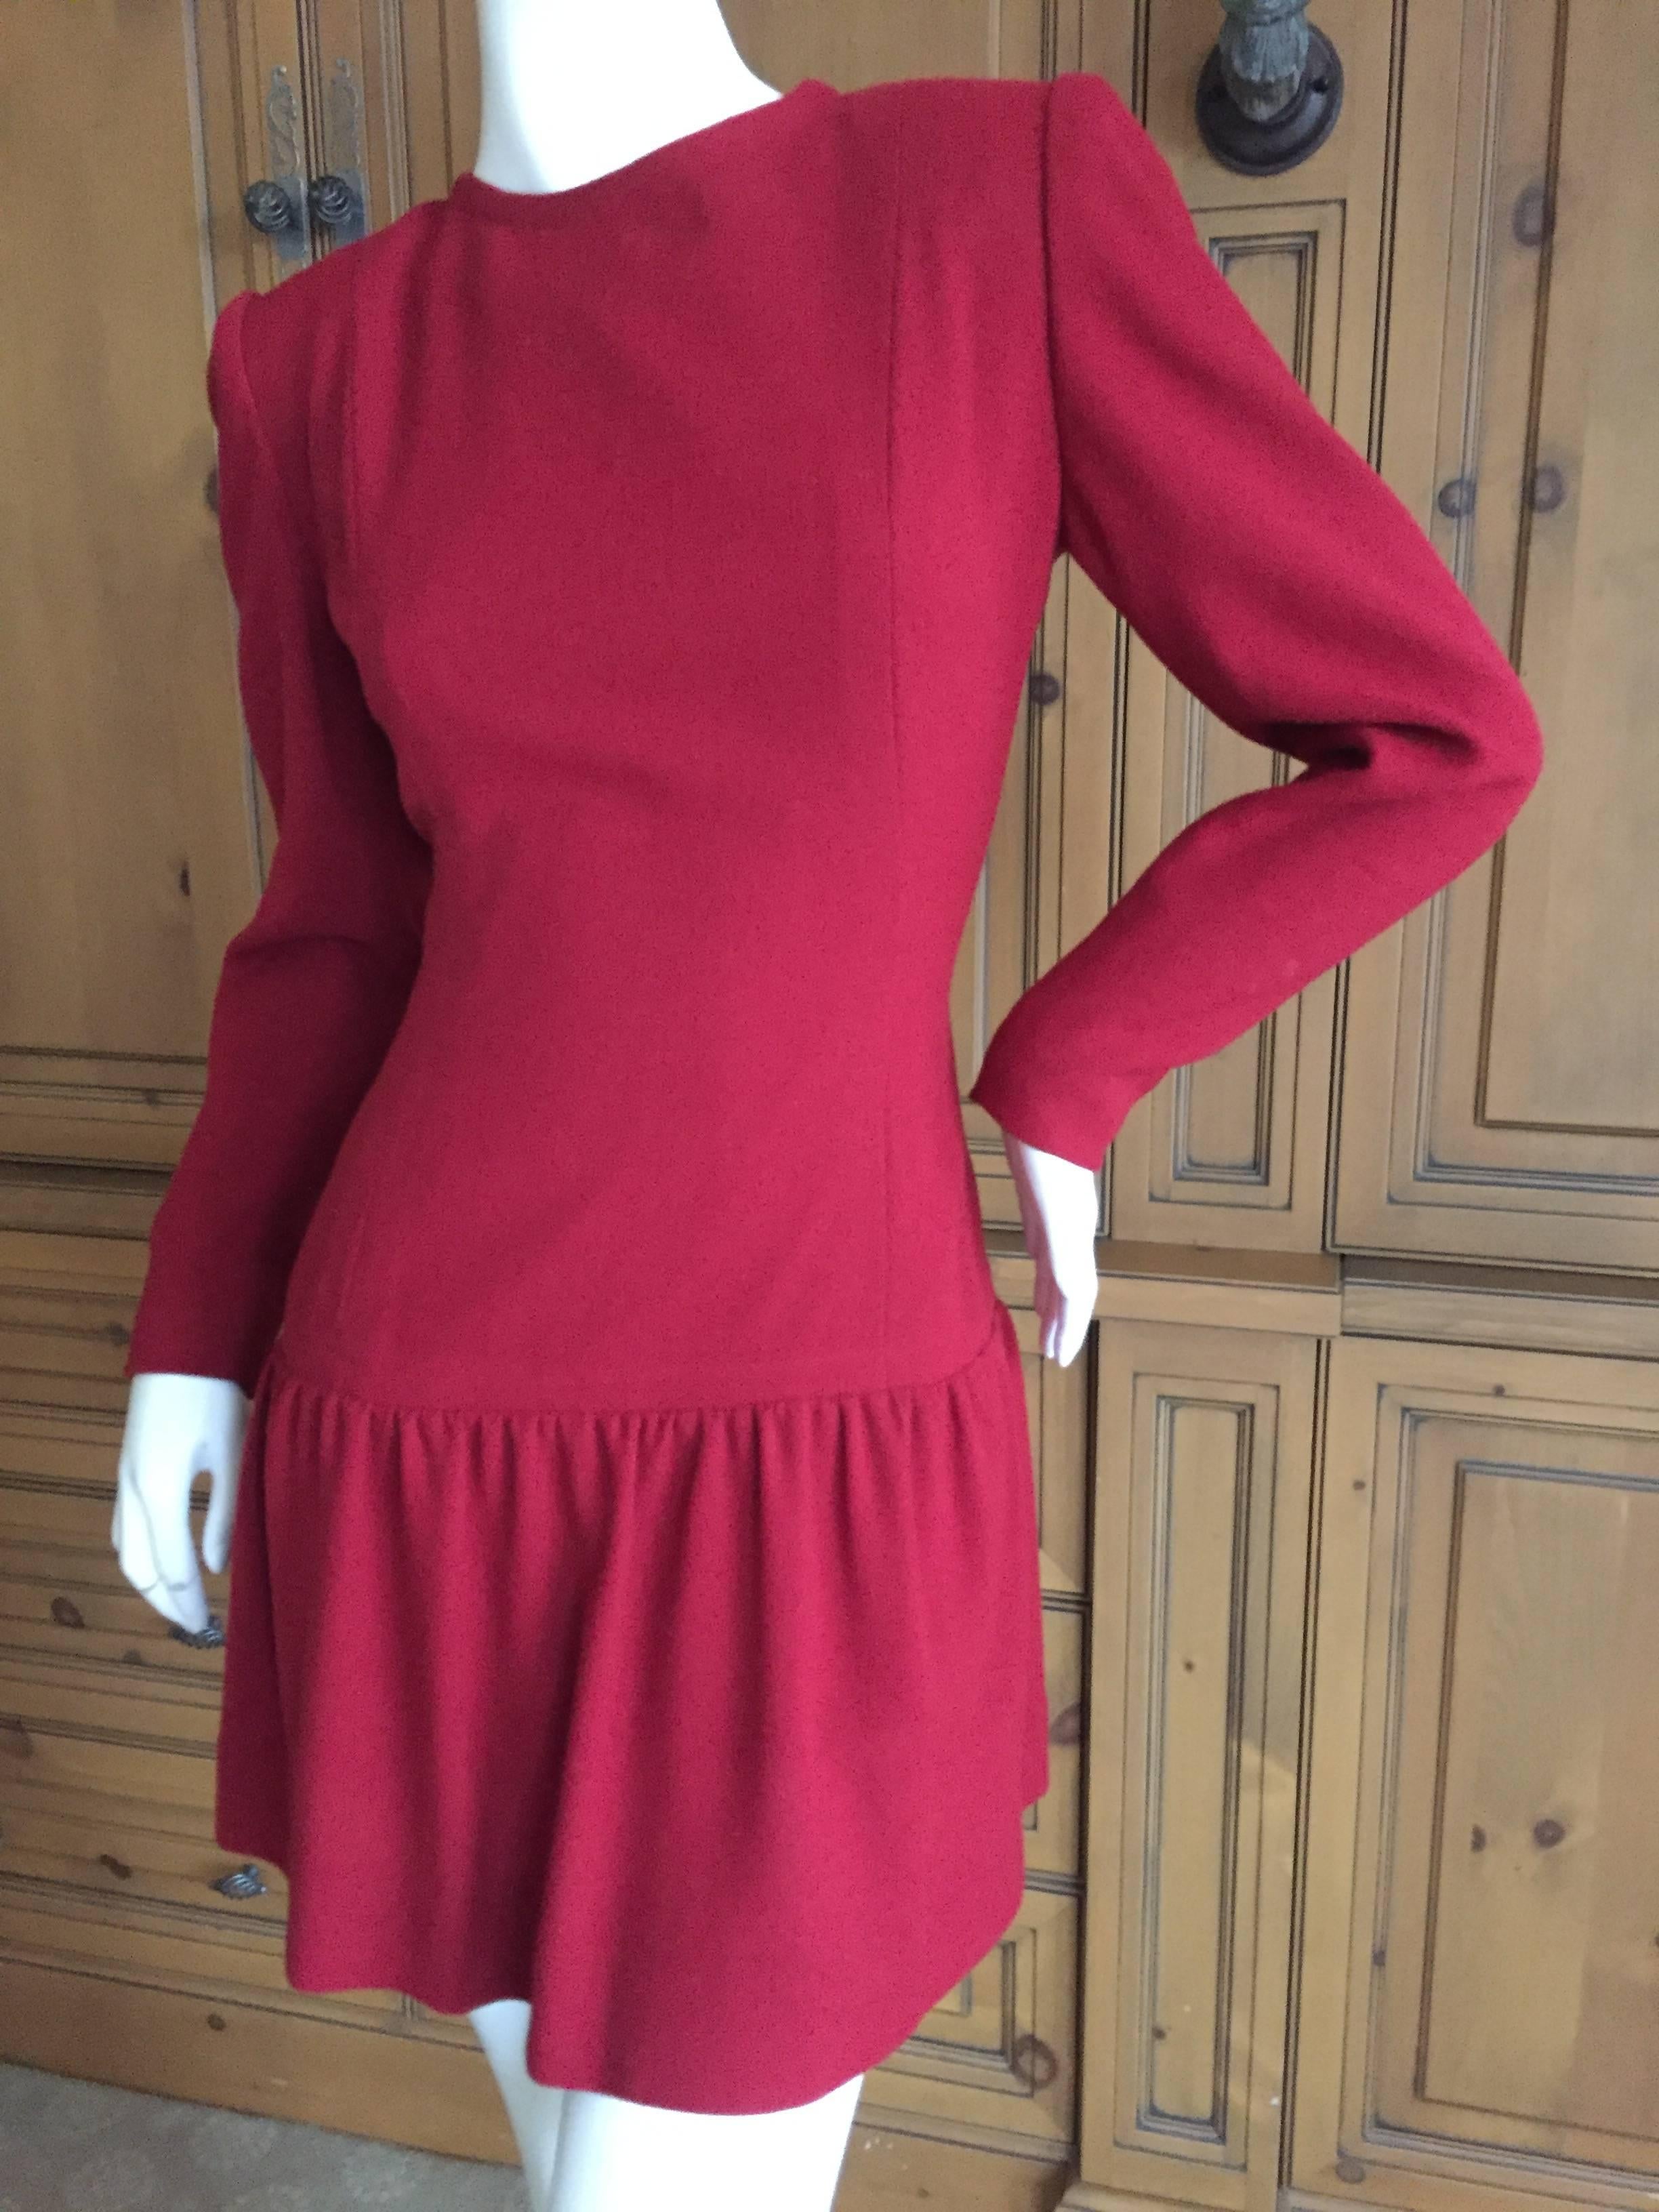 Darling red mii dress with skater skirt from Hubert Givenchy. Label reads Givenchy Couture.
Woo, fully  lined
Bust 38